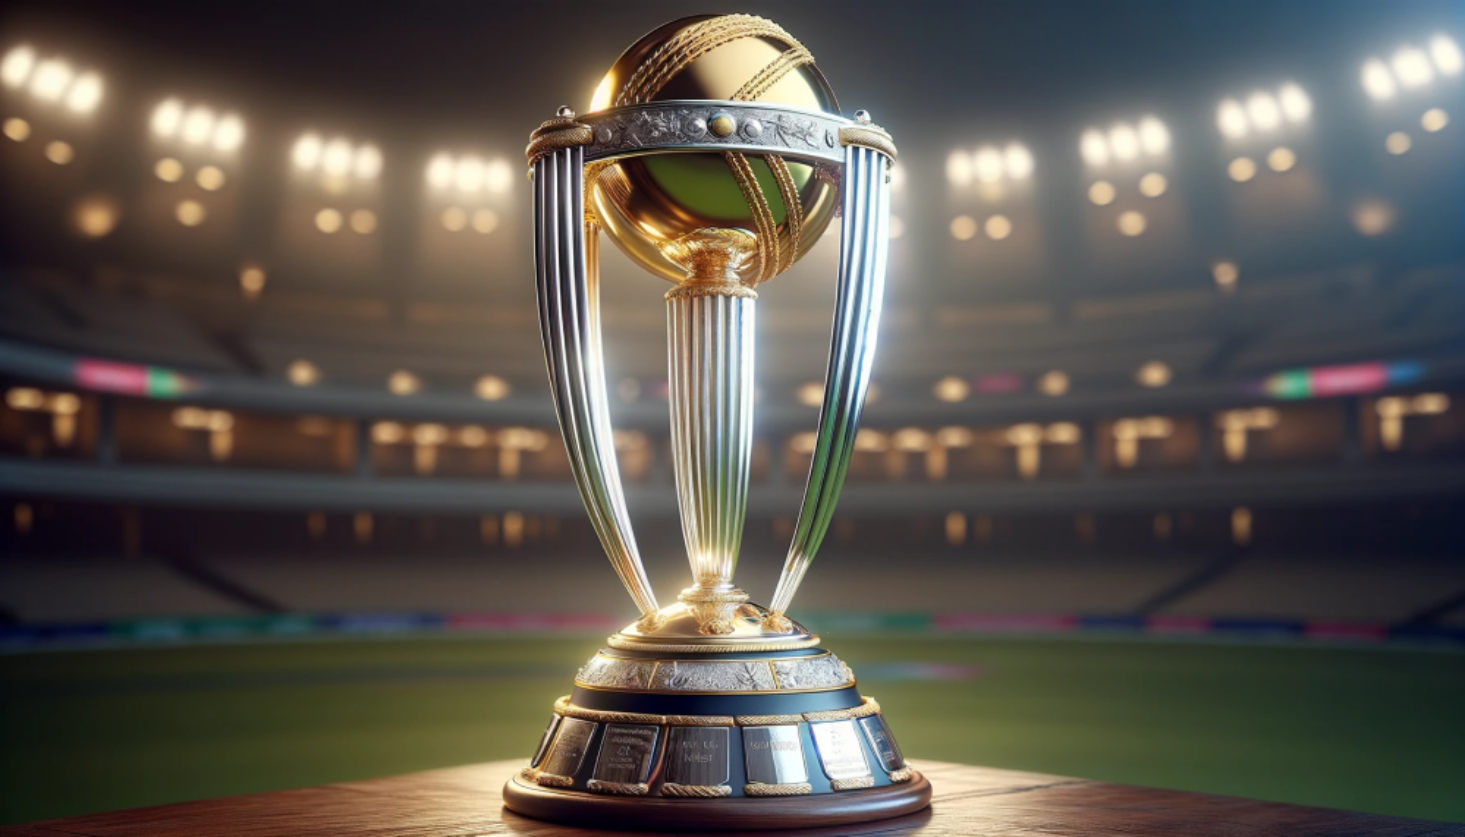 What Are The Top Bowling Achievements In World Cup Cricket